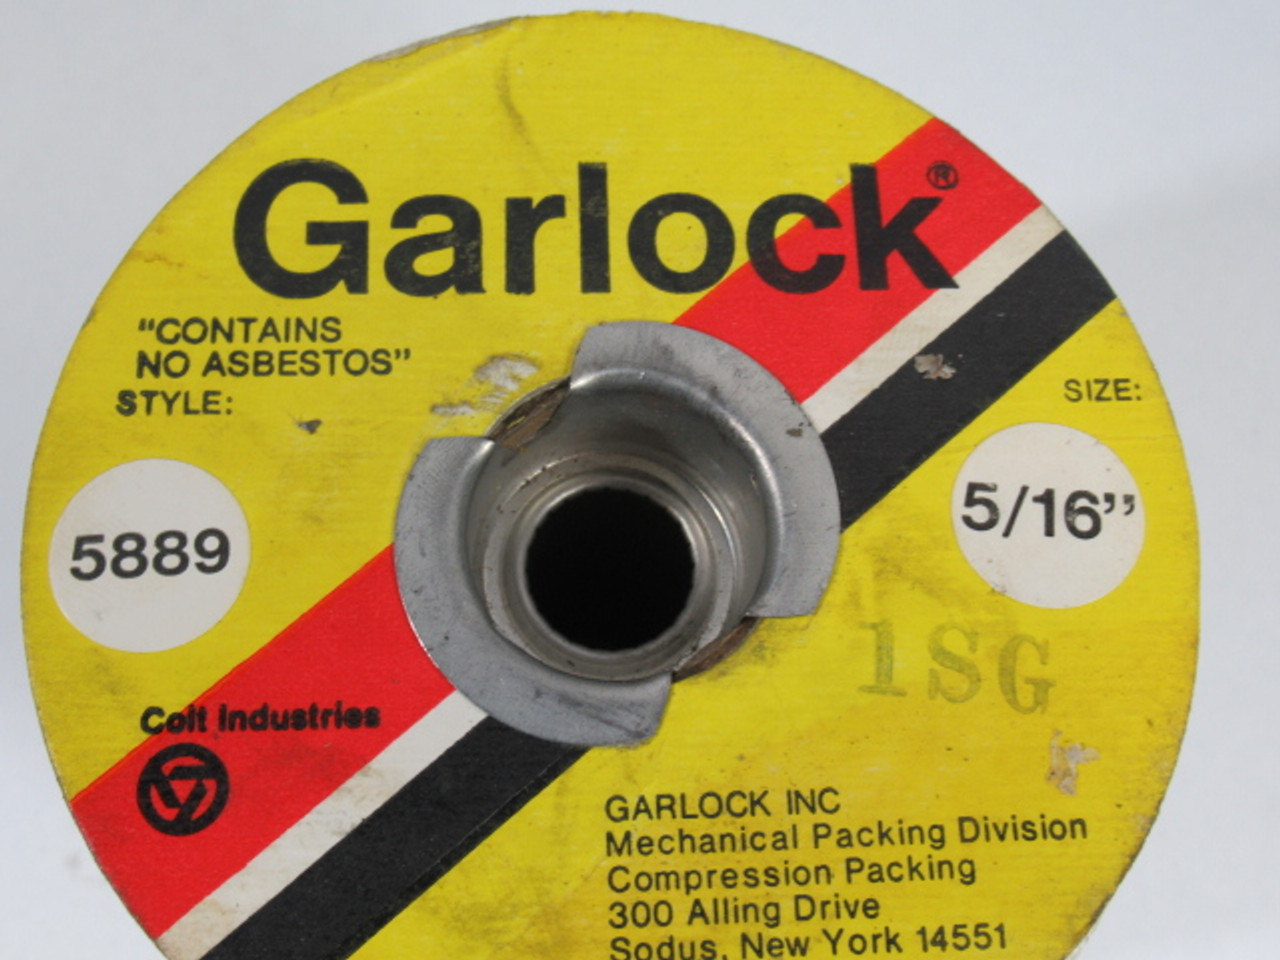 Garlock 41891-1020 Braided Compression Packing Size 5/16" Style 5889 ! NEW !